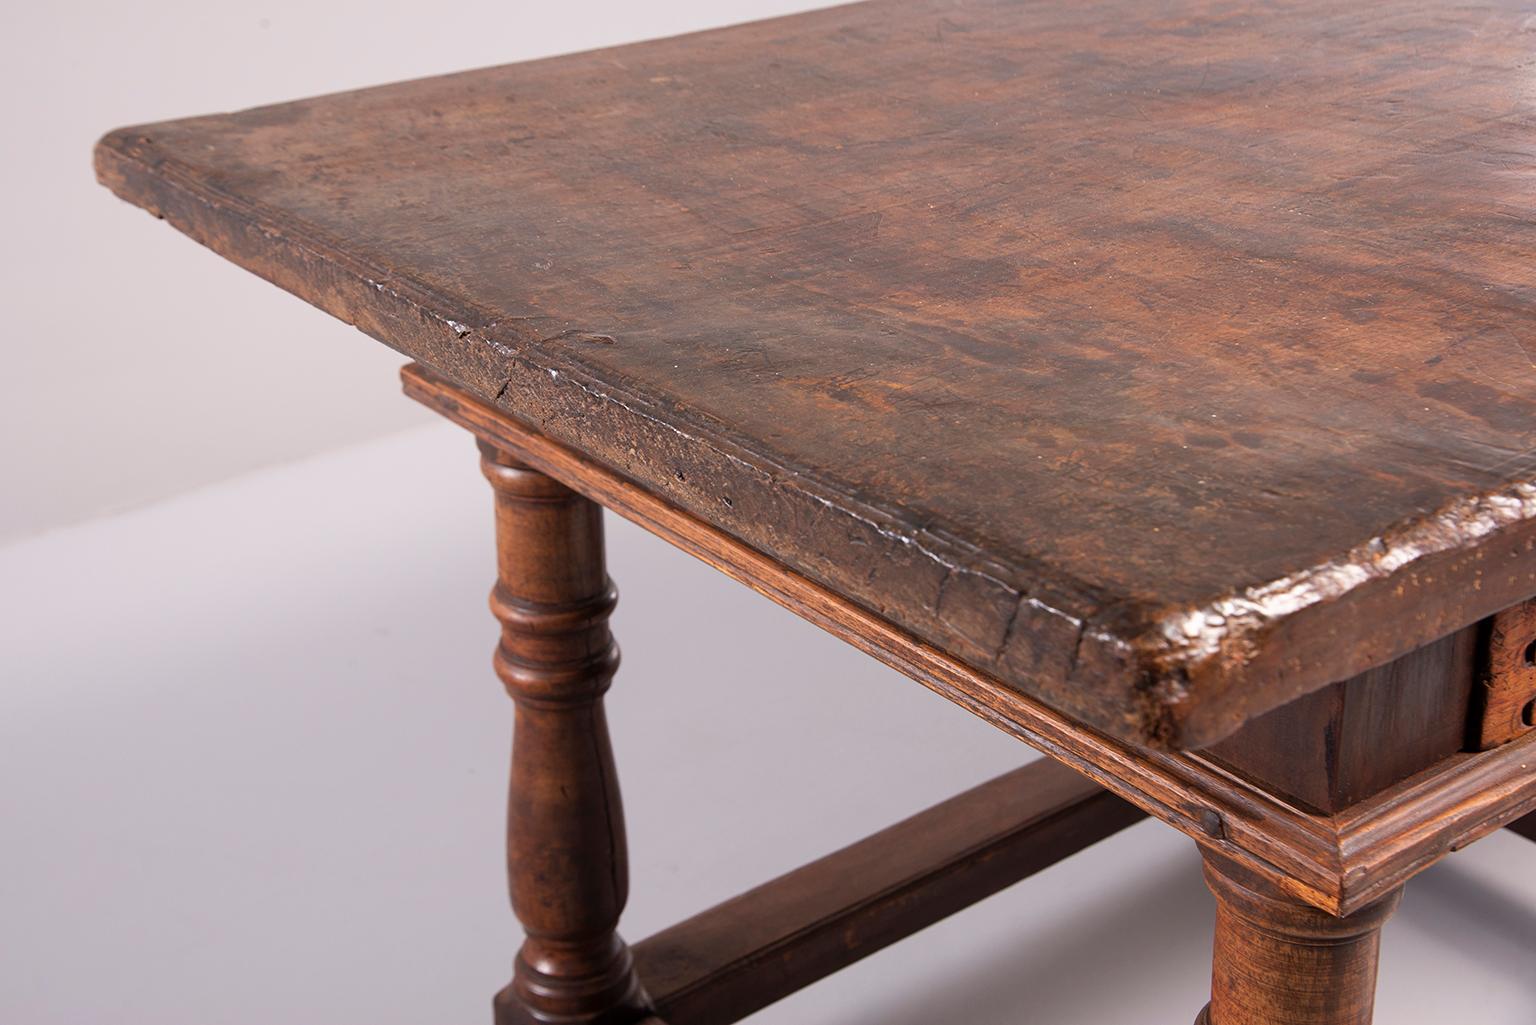  Portuguese All Original 18th Century Carved Walnut Table 2